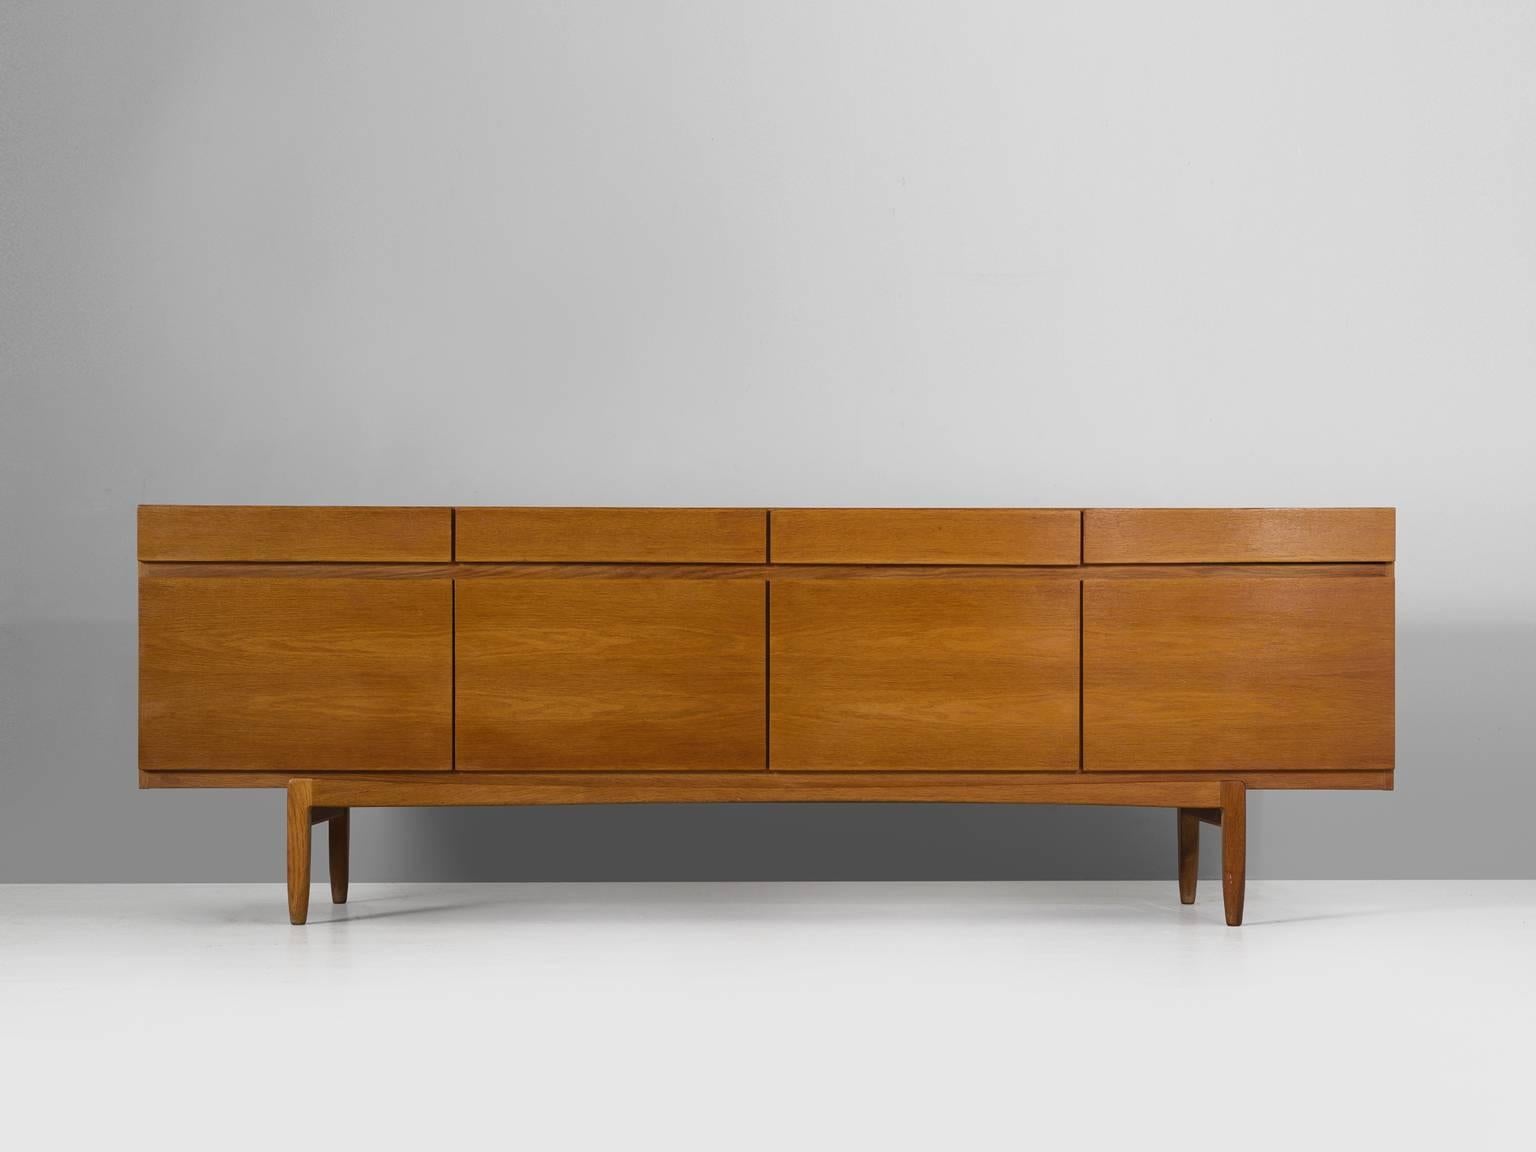 Sideboard model FA66, in teak, by Ib Kofod-Larsen for Faarup Møbelfabrik, Denmark, 1960s.

Excellent designed credenza by Ib Kofod-Larsen. The sideboard contains four doors with four drawers directly above it. The inside contains three shelves and